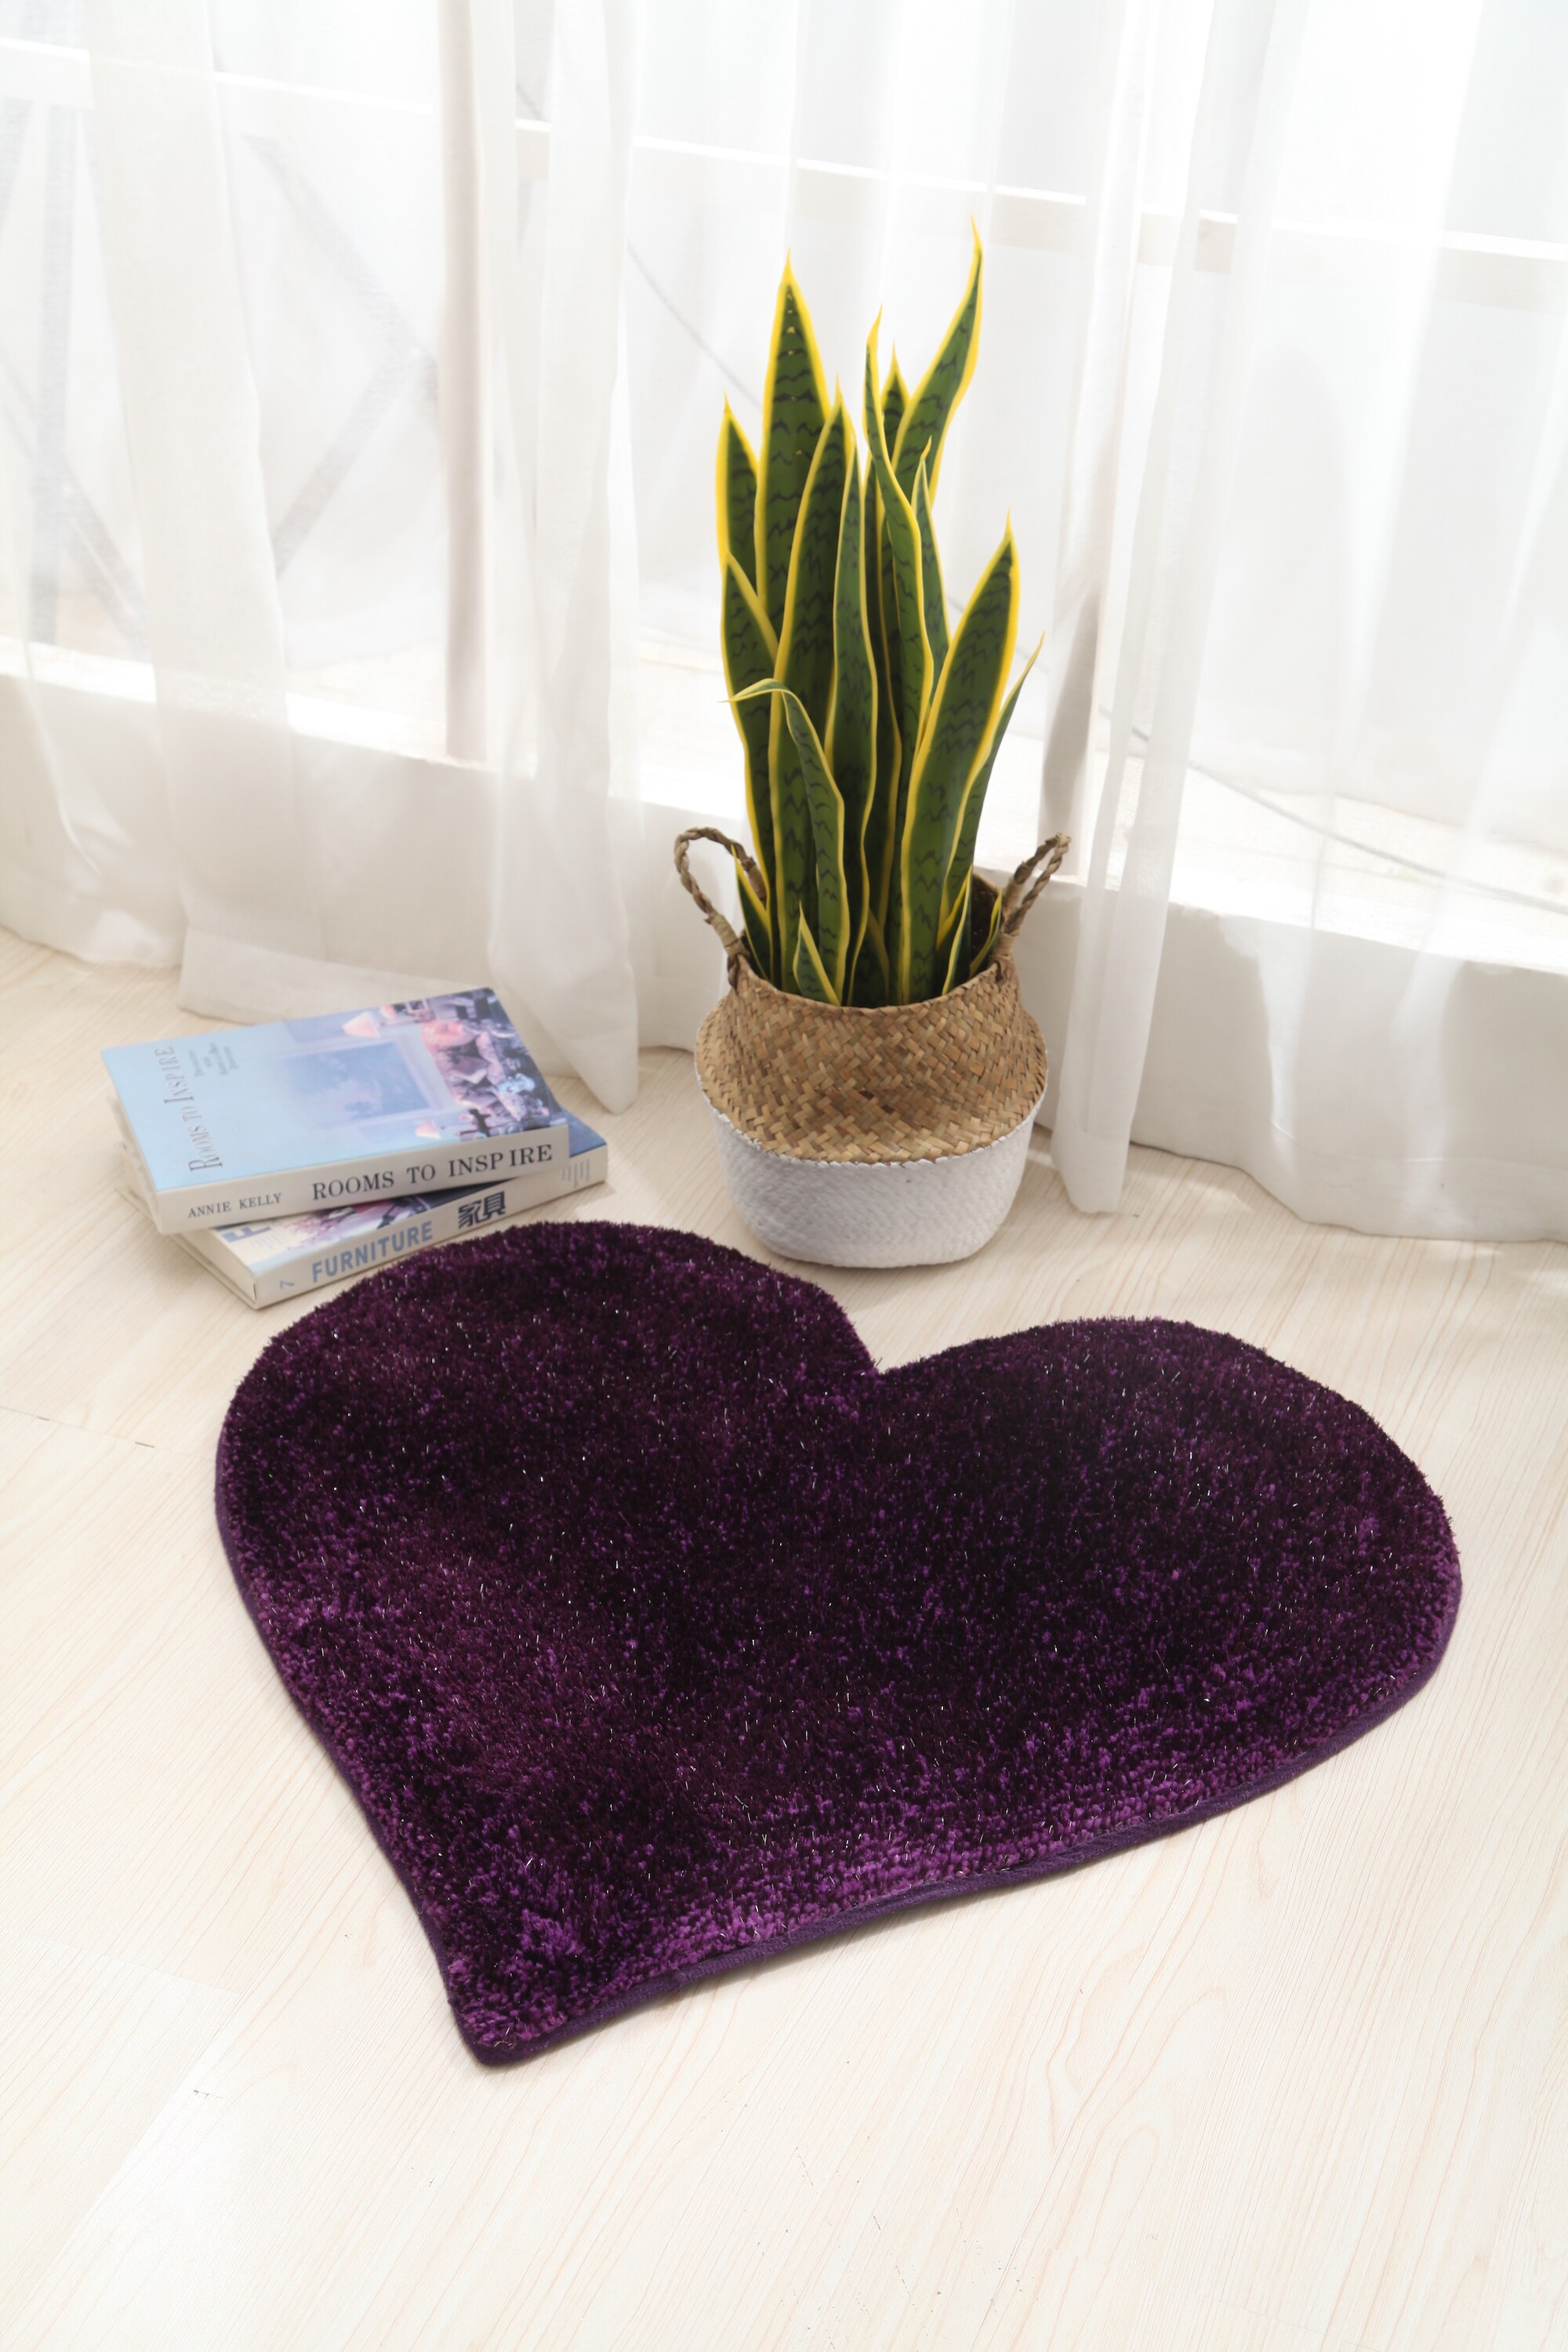 Heart-shaped Rug Gripper, Double Sided Non-slip Rug Pads Rug Tape